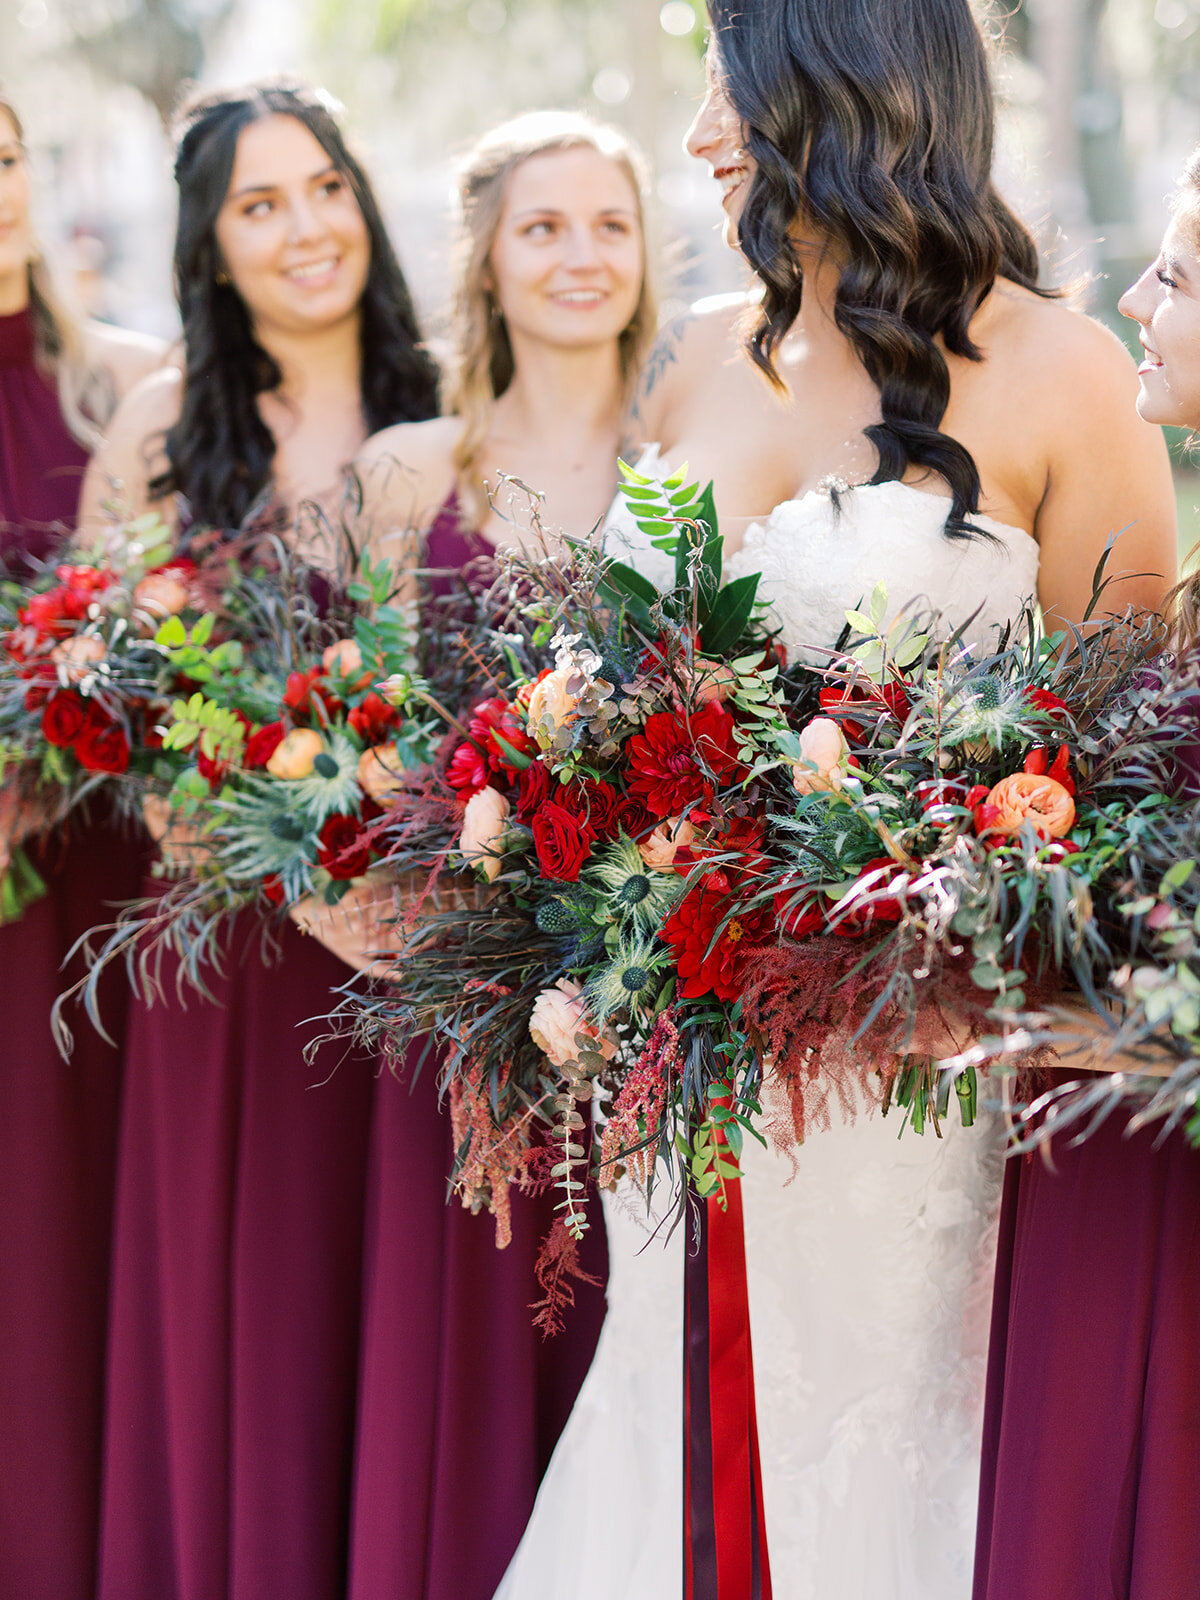 Bouquets with deep fall colors and different types of greenery